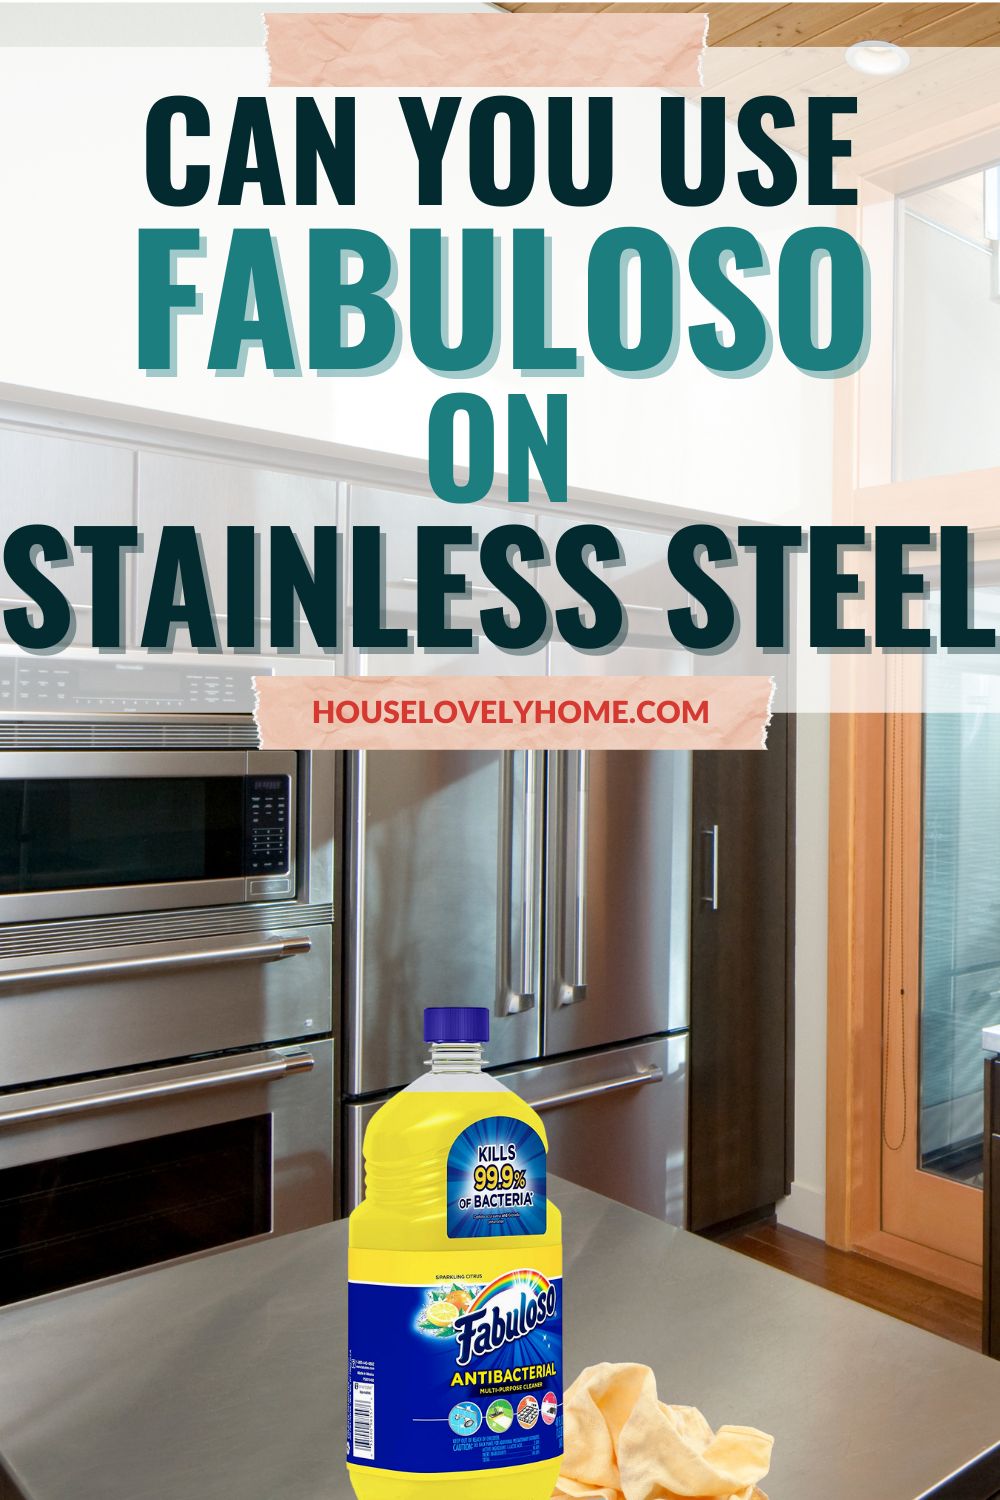 Image showing a contaner of yellow Fabuloso in a stainless steel table top with stainless steel refrigerator and oven and a text overlay that reads Can you use Fabuloso on stainless steel